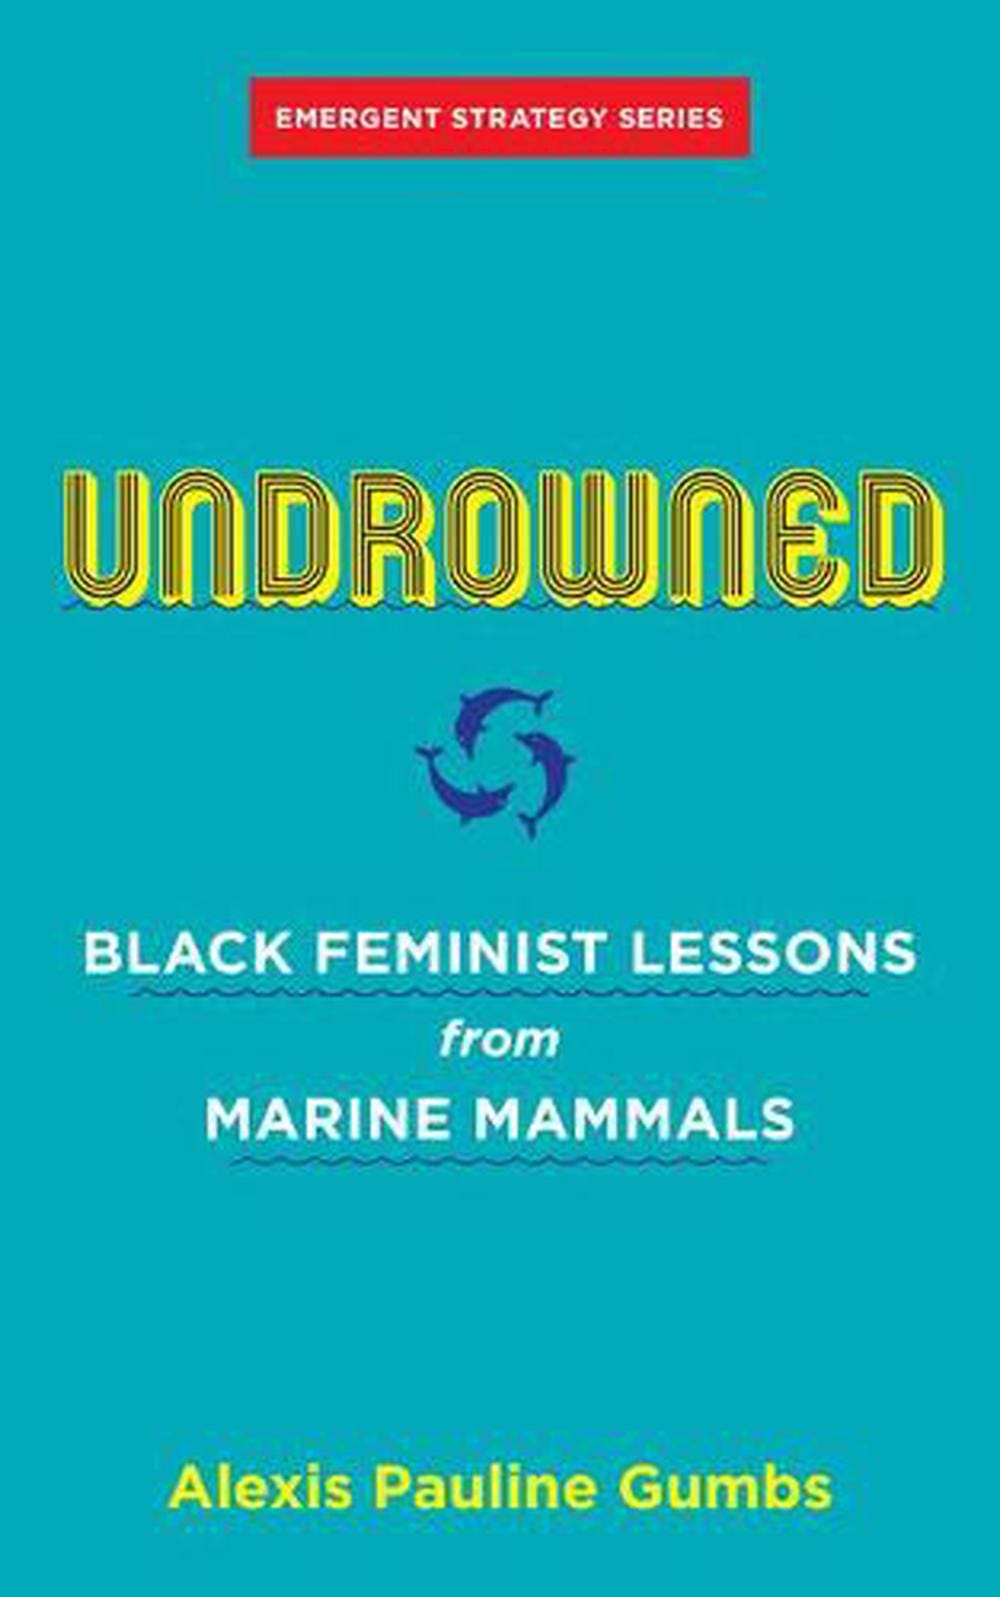 Cover of Undrowned: Black Feminist Lessons from Marine Mammals by Alexis Pauline Gumbs